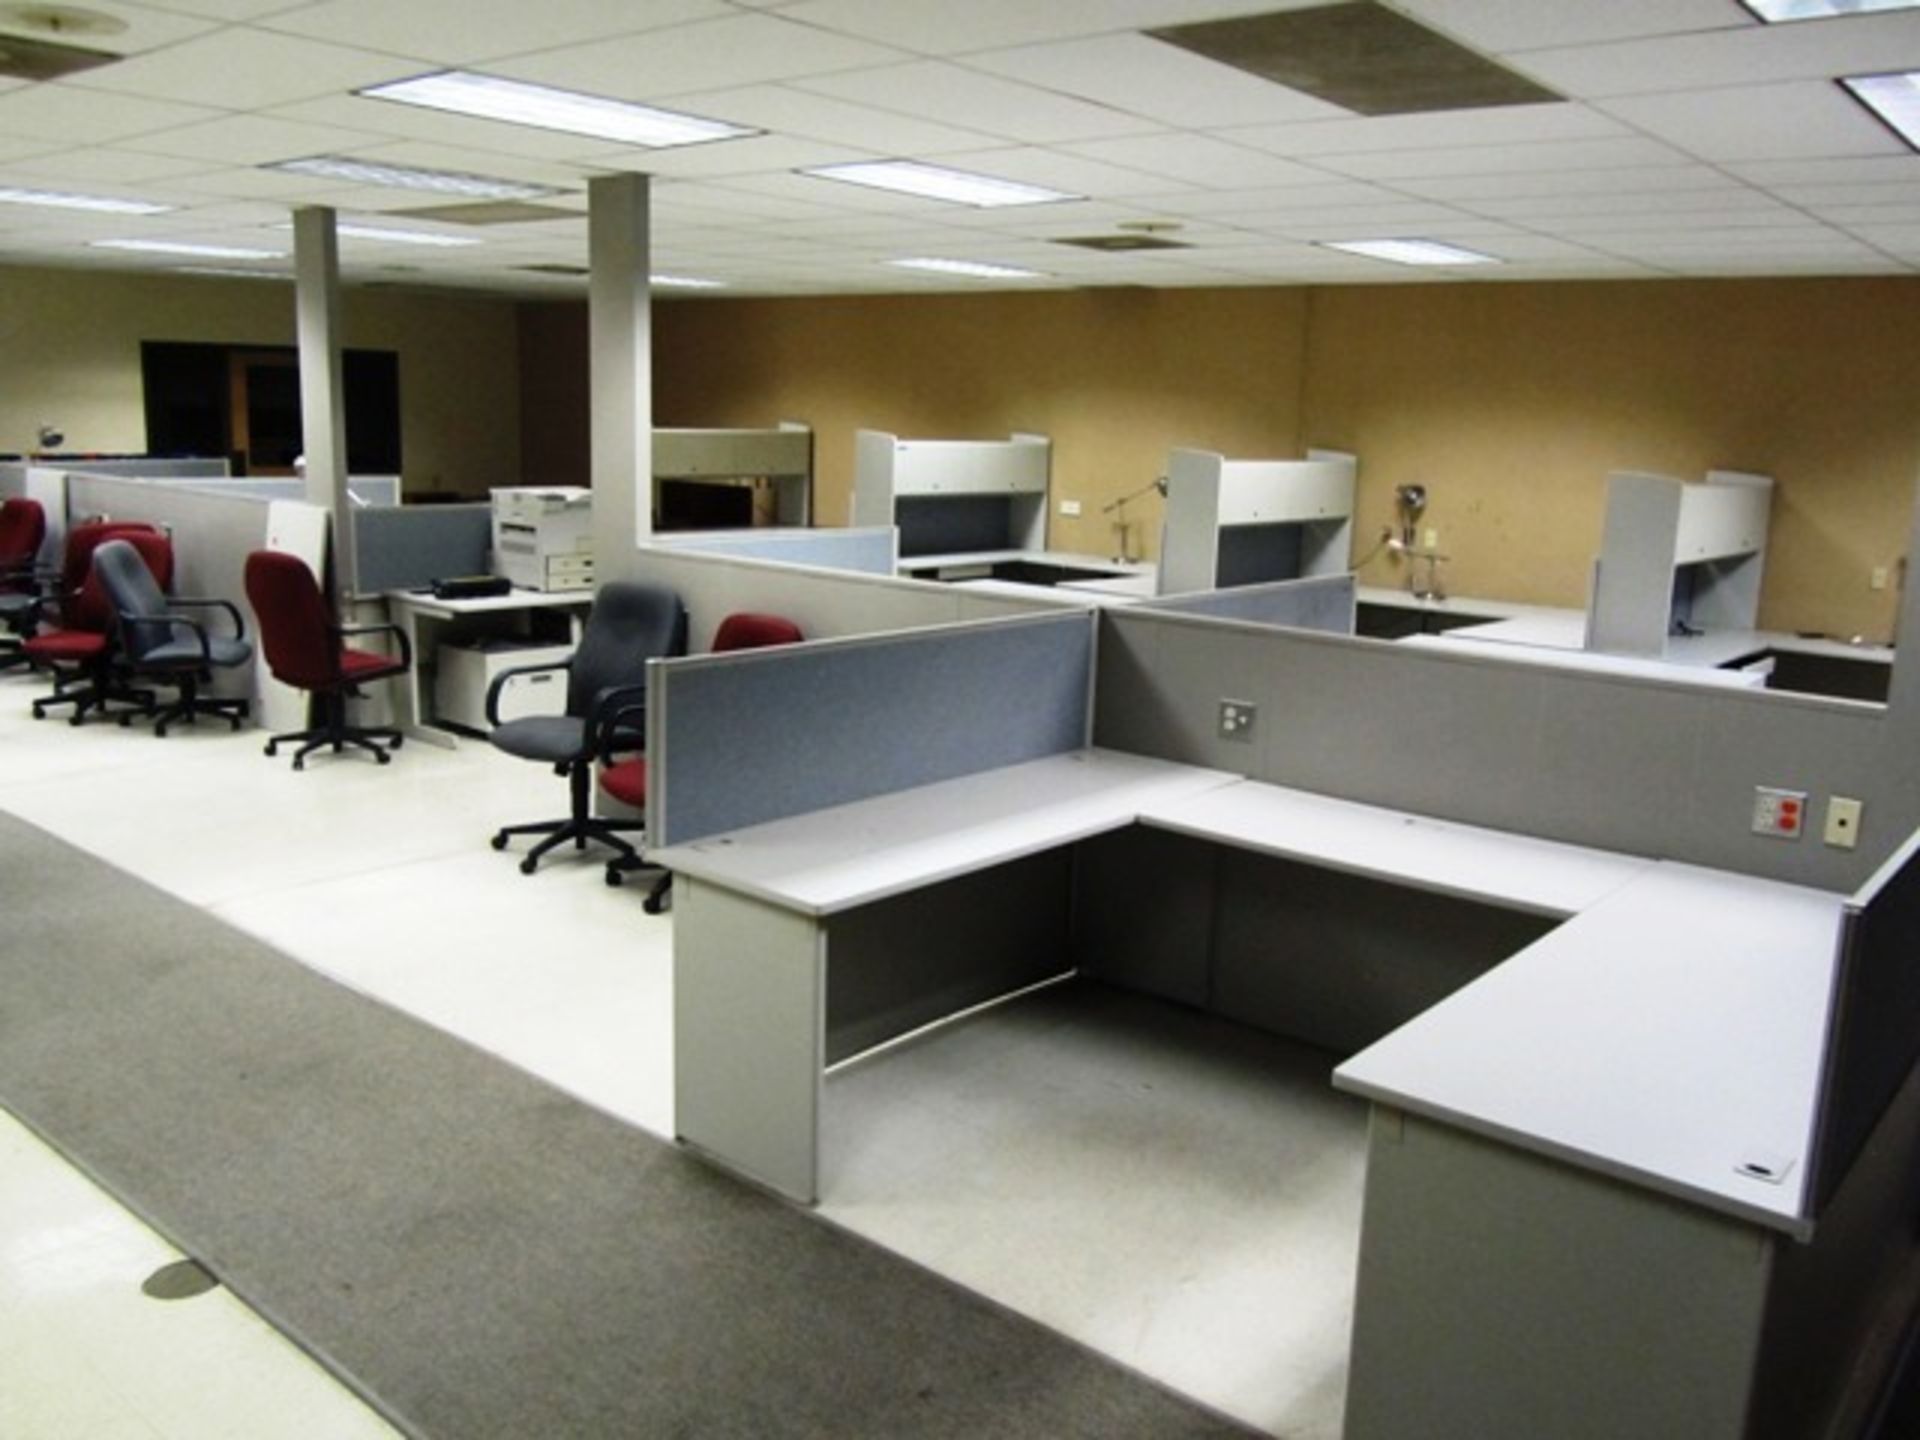 9 Sections of Office Cubicle Work Stations, Misc Desk, Chairs